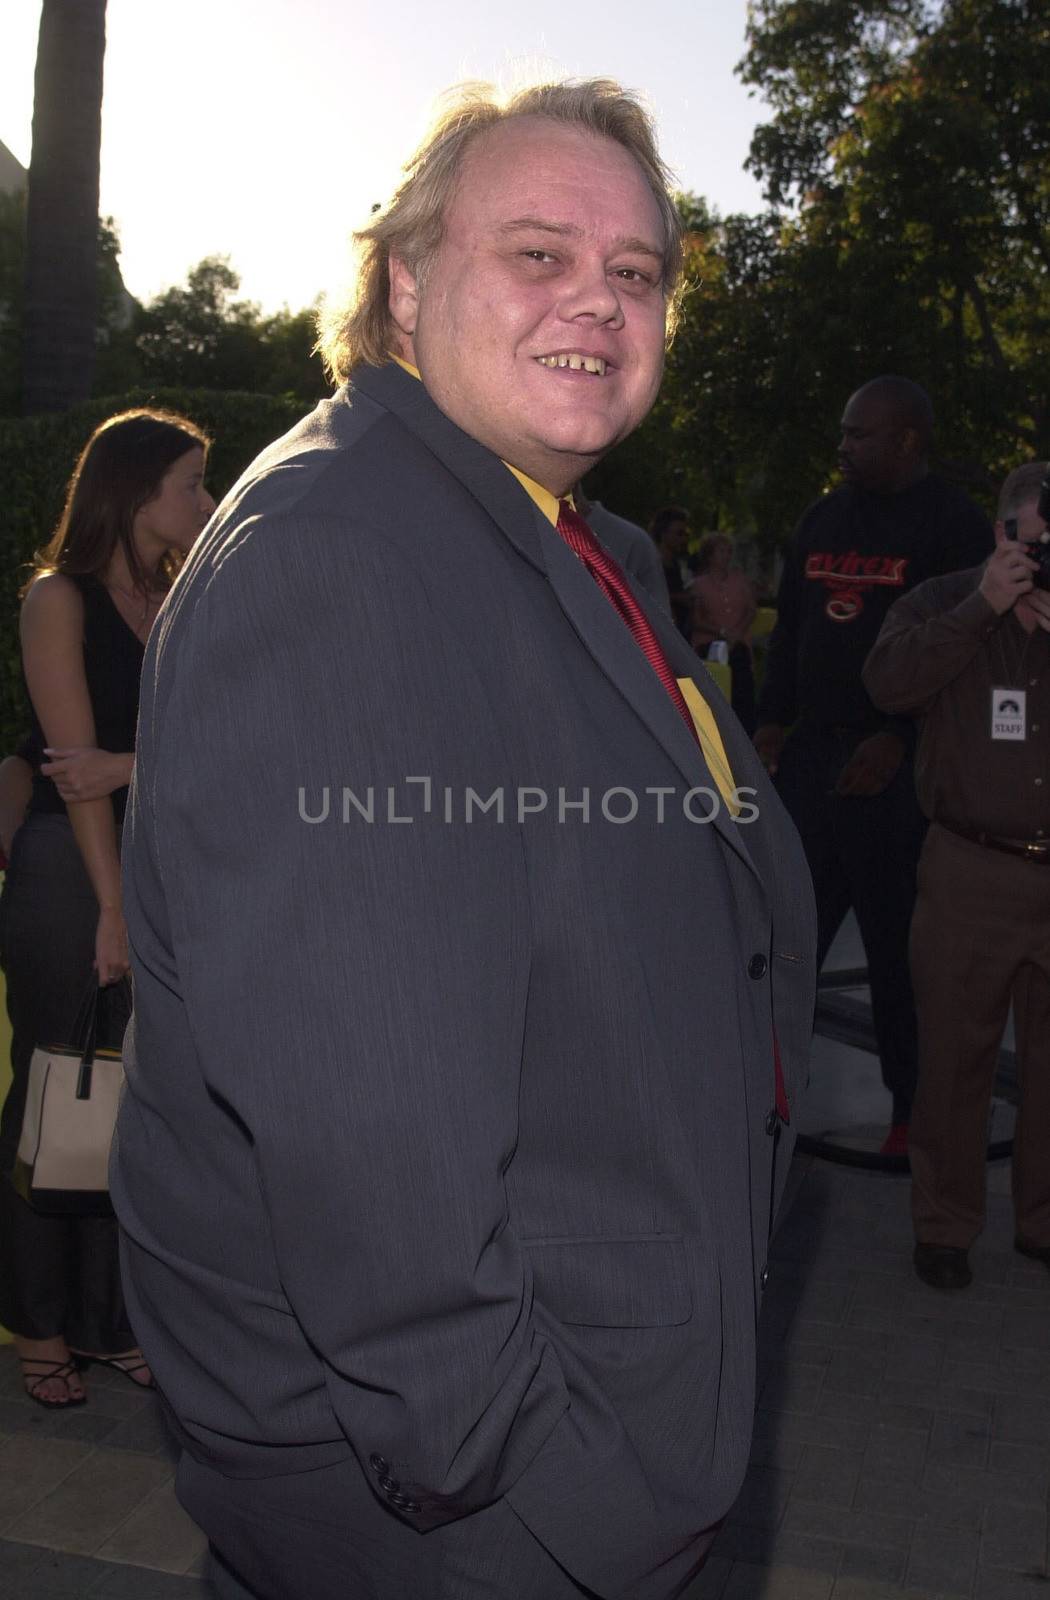 Louie Anderson at the premiere of "Original Kings of Comedy" in Hollywood. 08-10-00